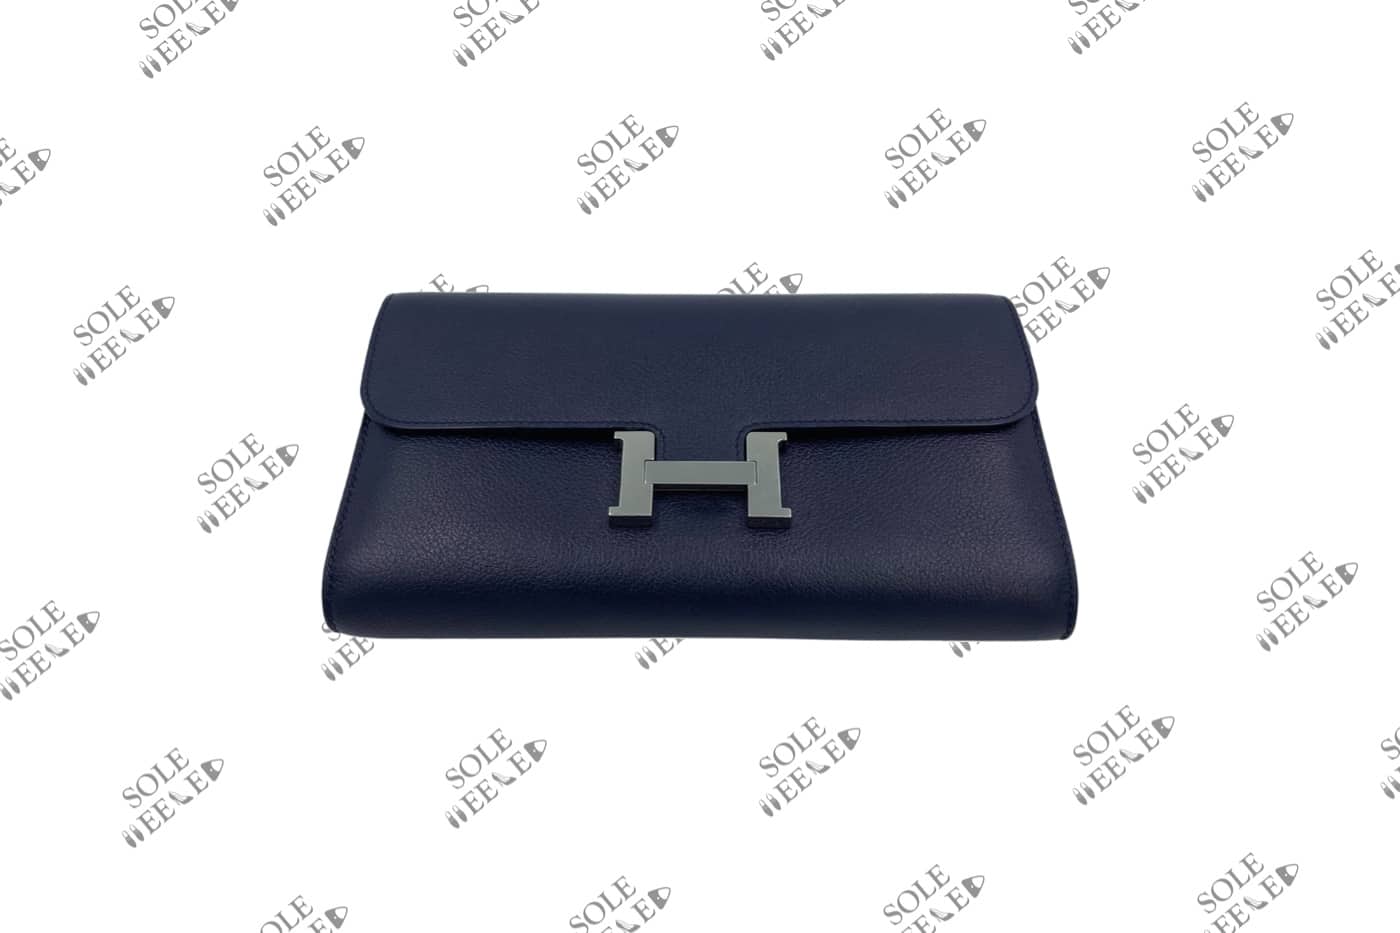 Hermes Constance Long Wallet with Colored 'H' Clasp